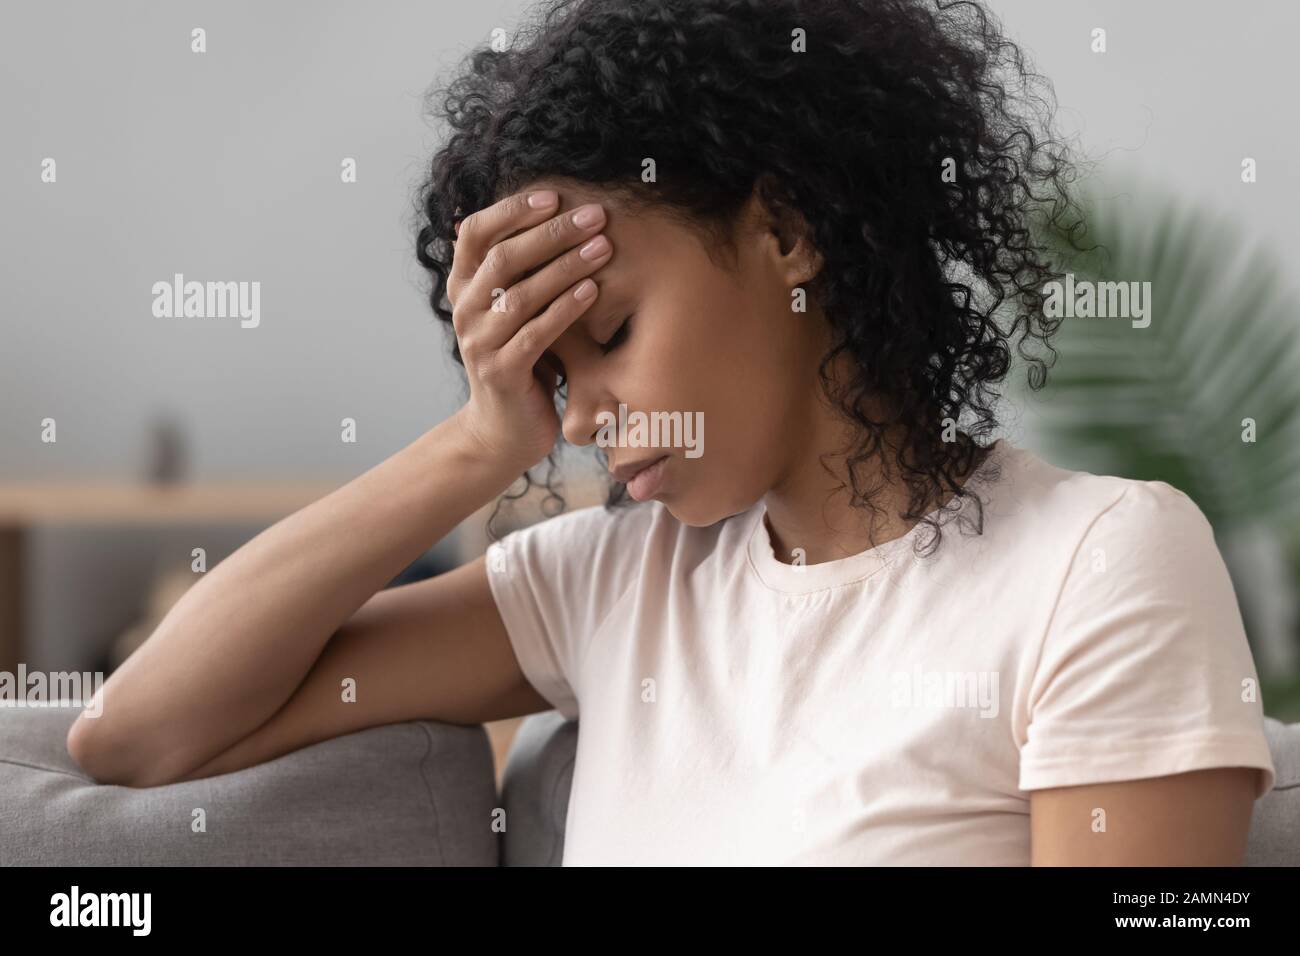 African woman sitting on couch feels unhappy having problems Stock Photo